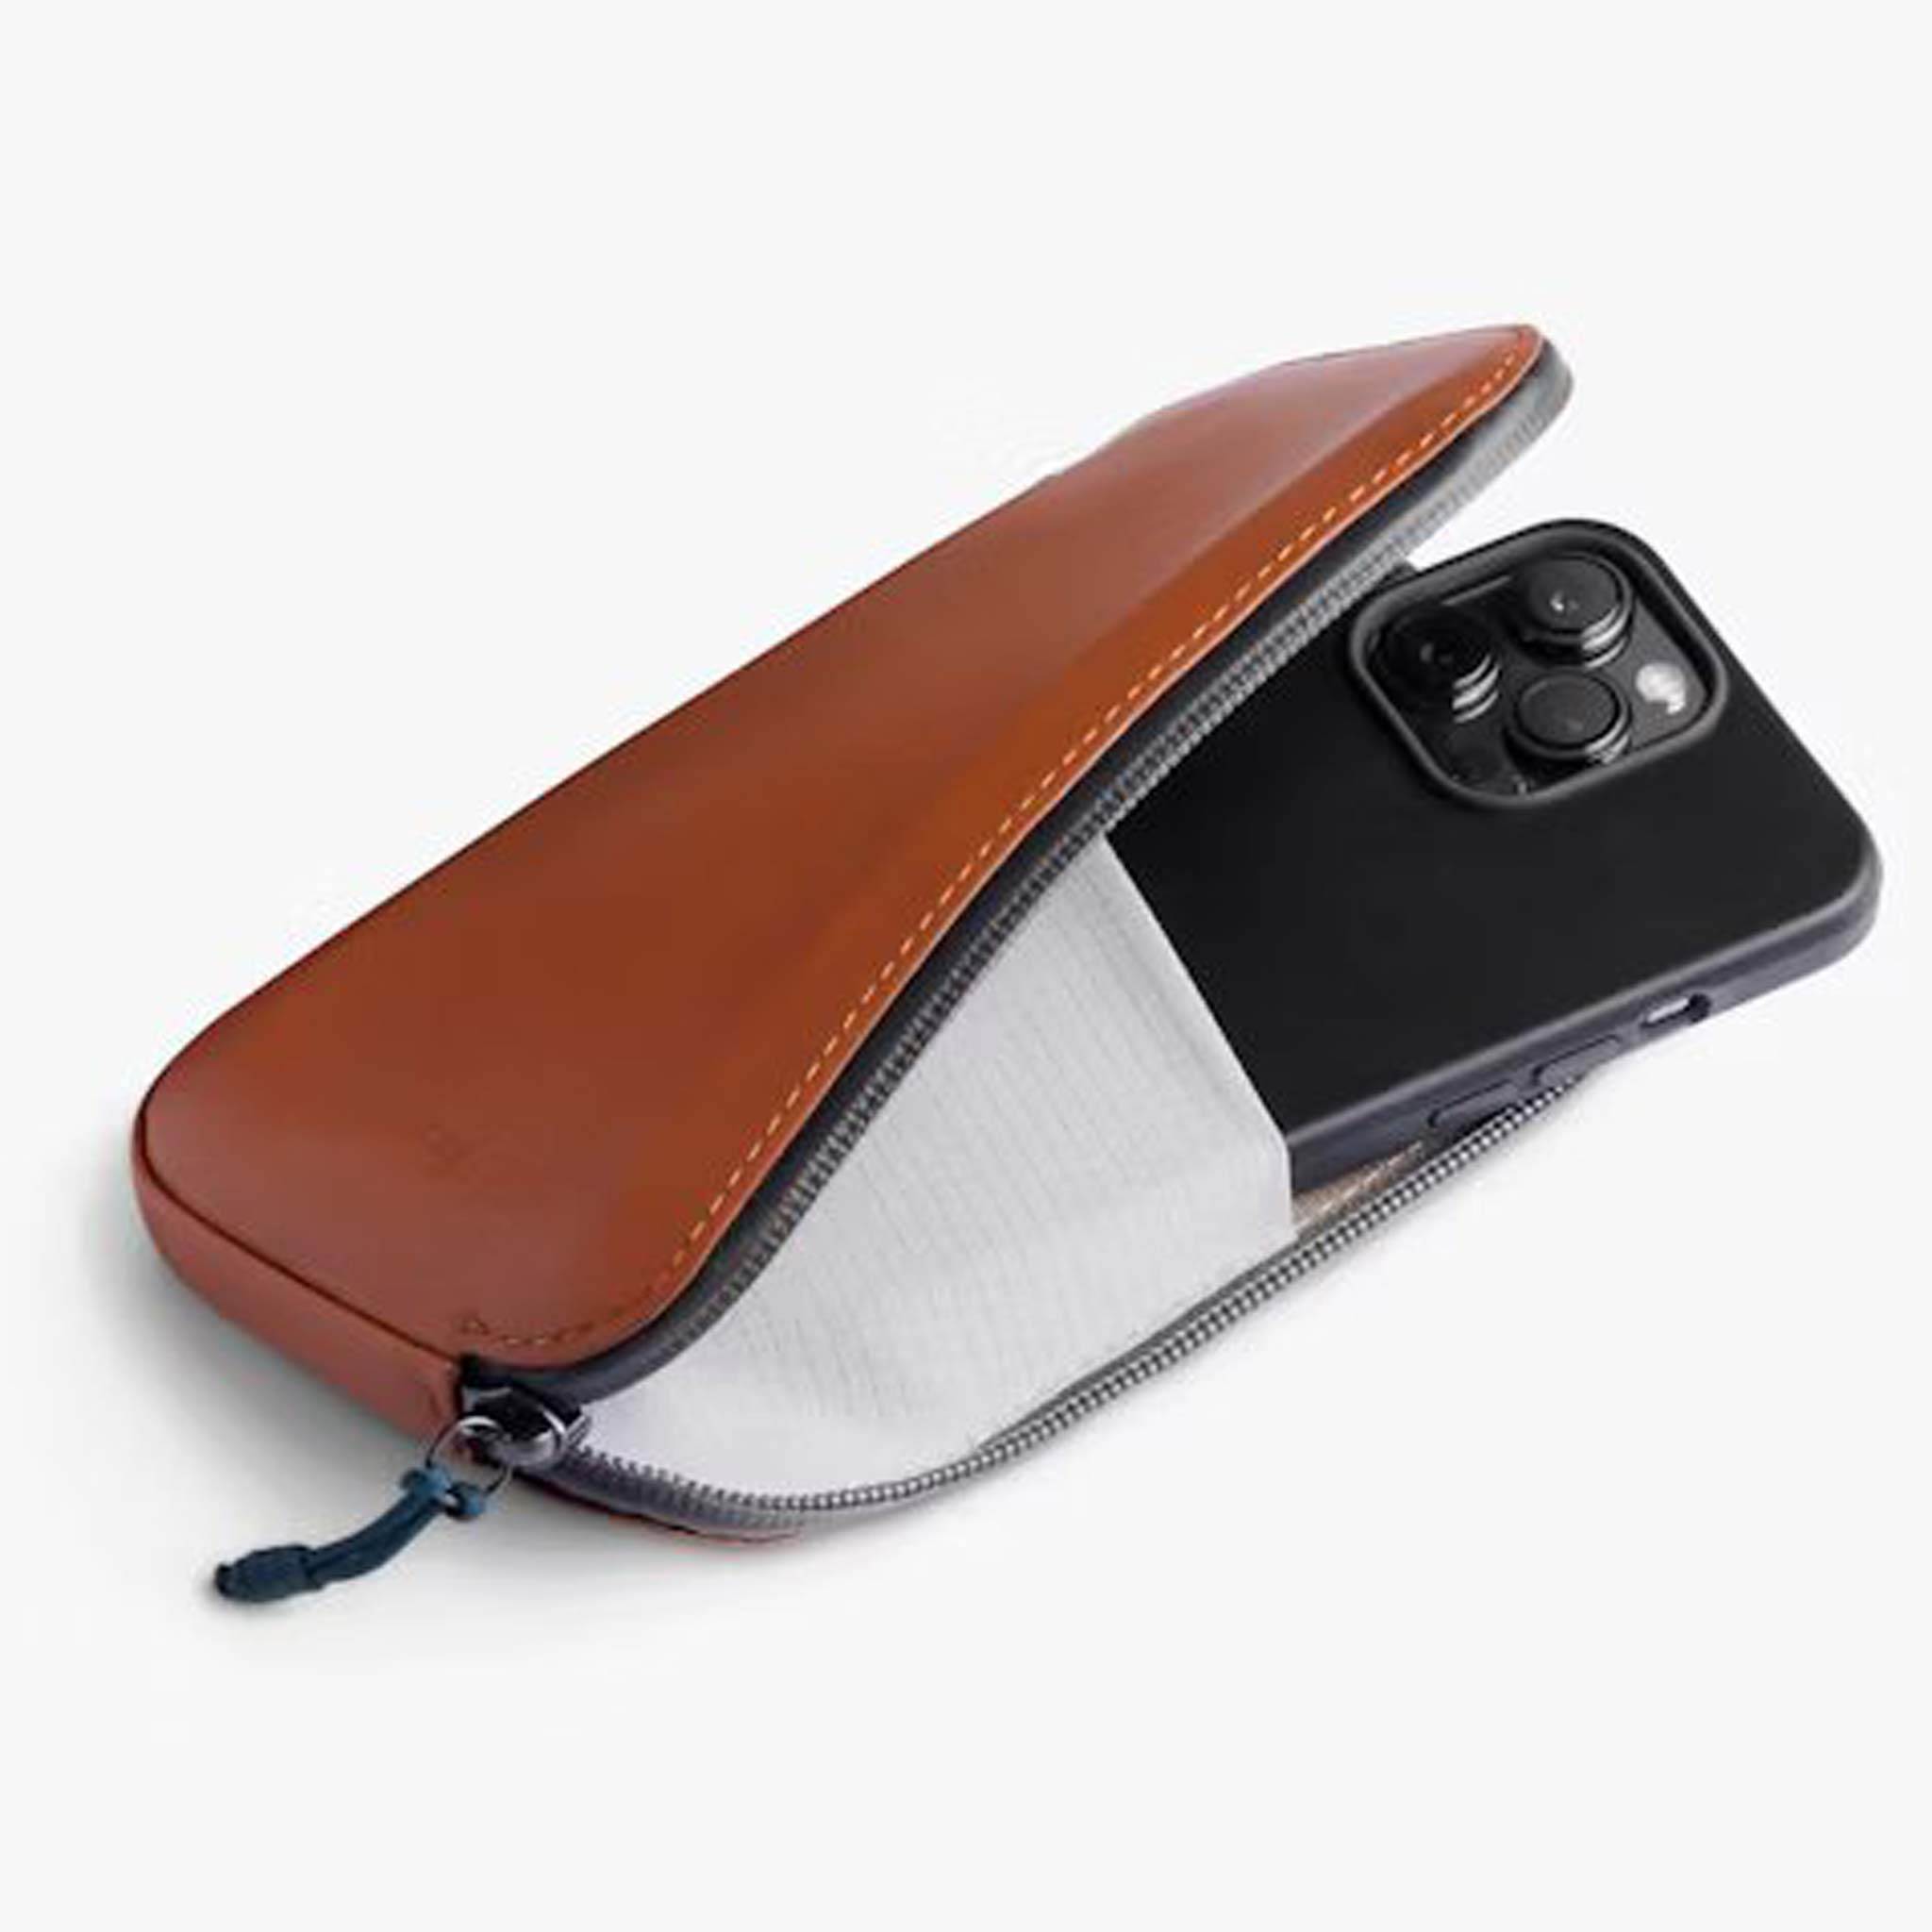 All-Conditions Phone Pocket Plus